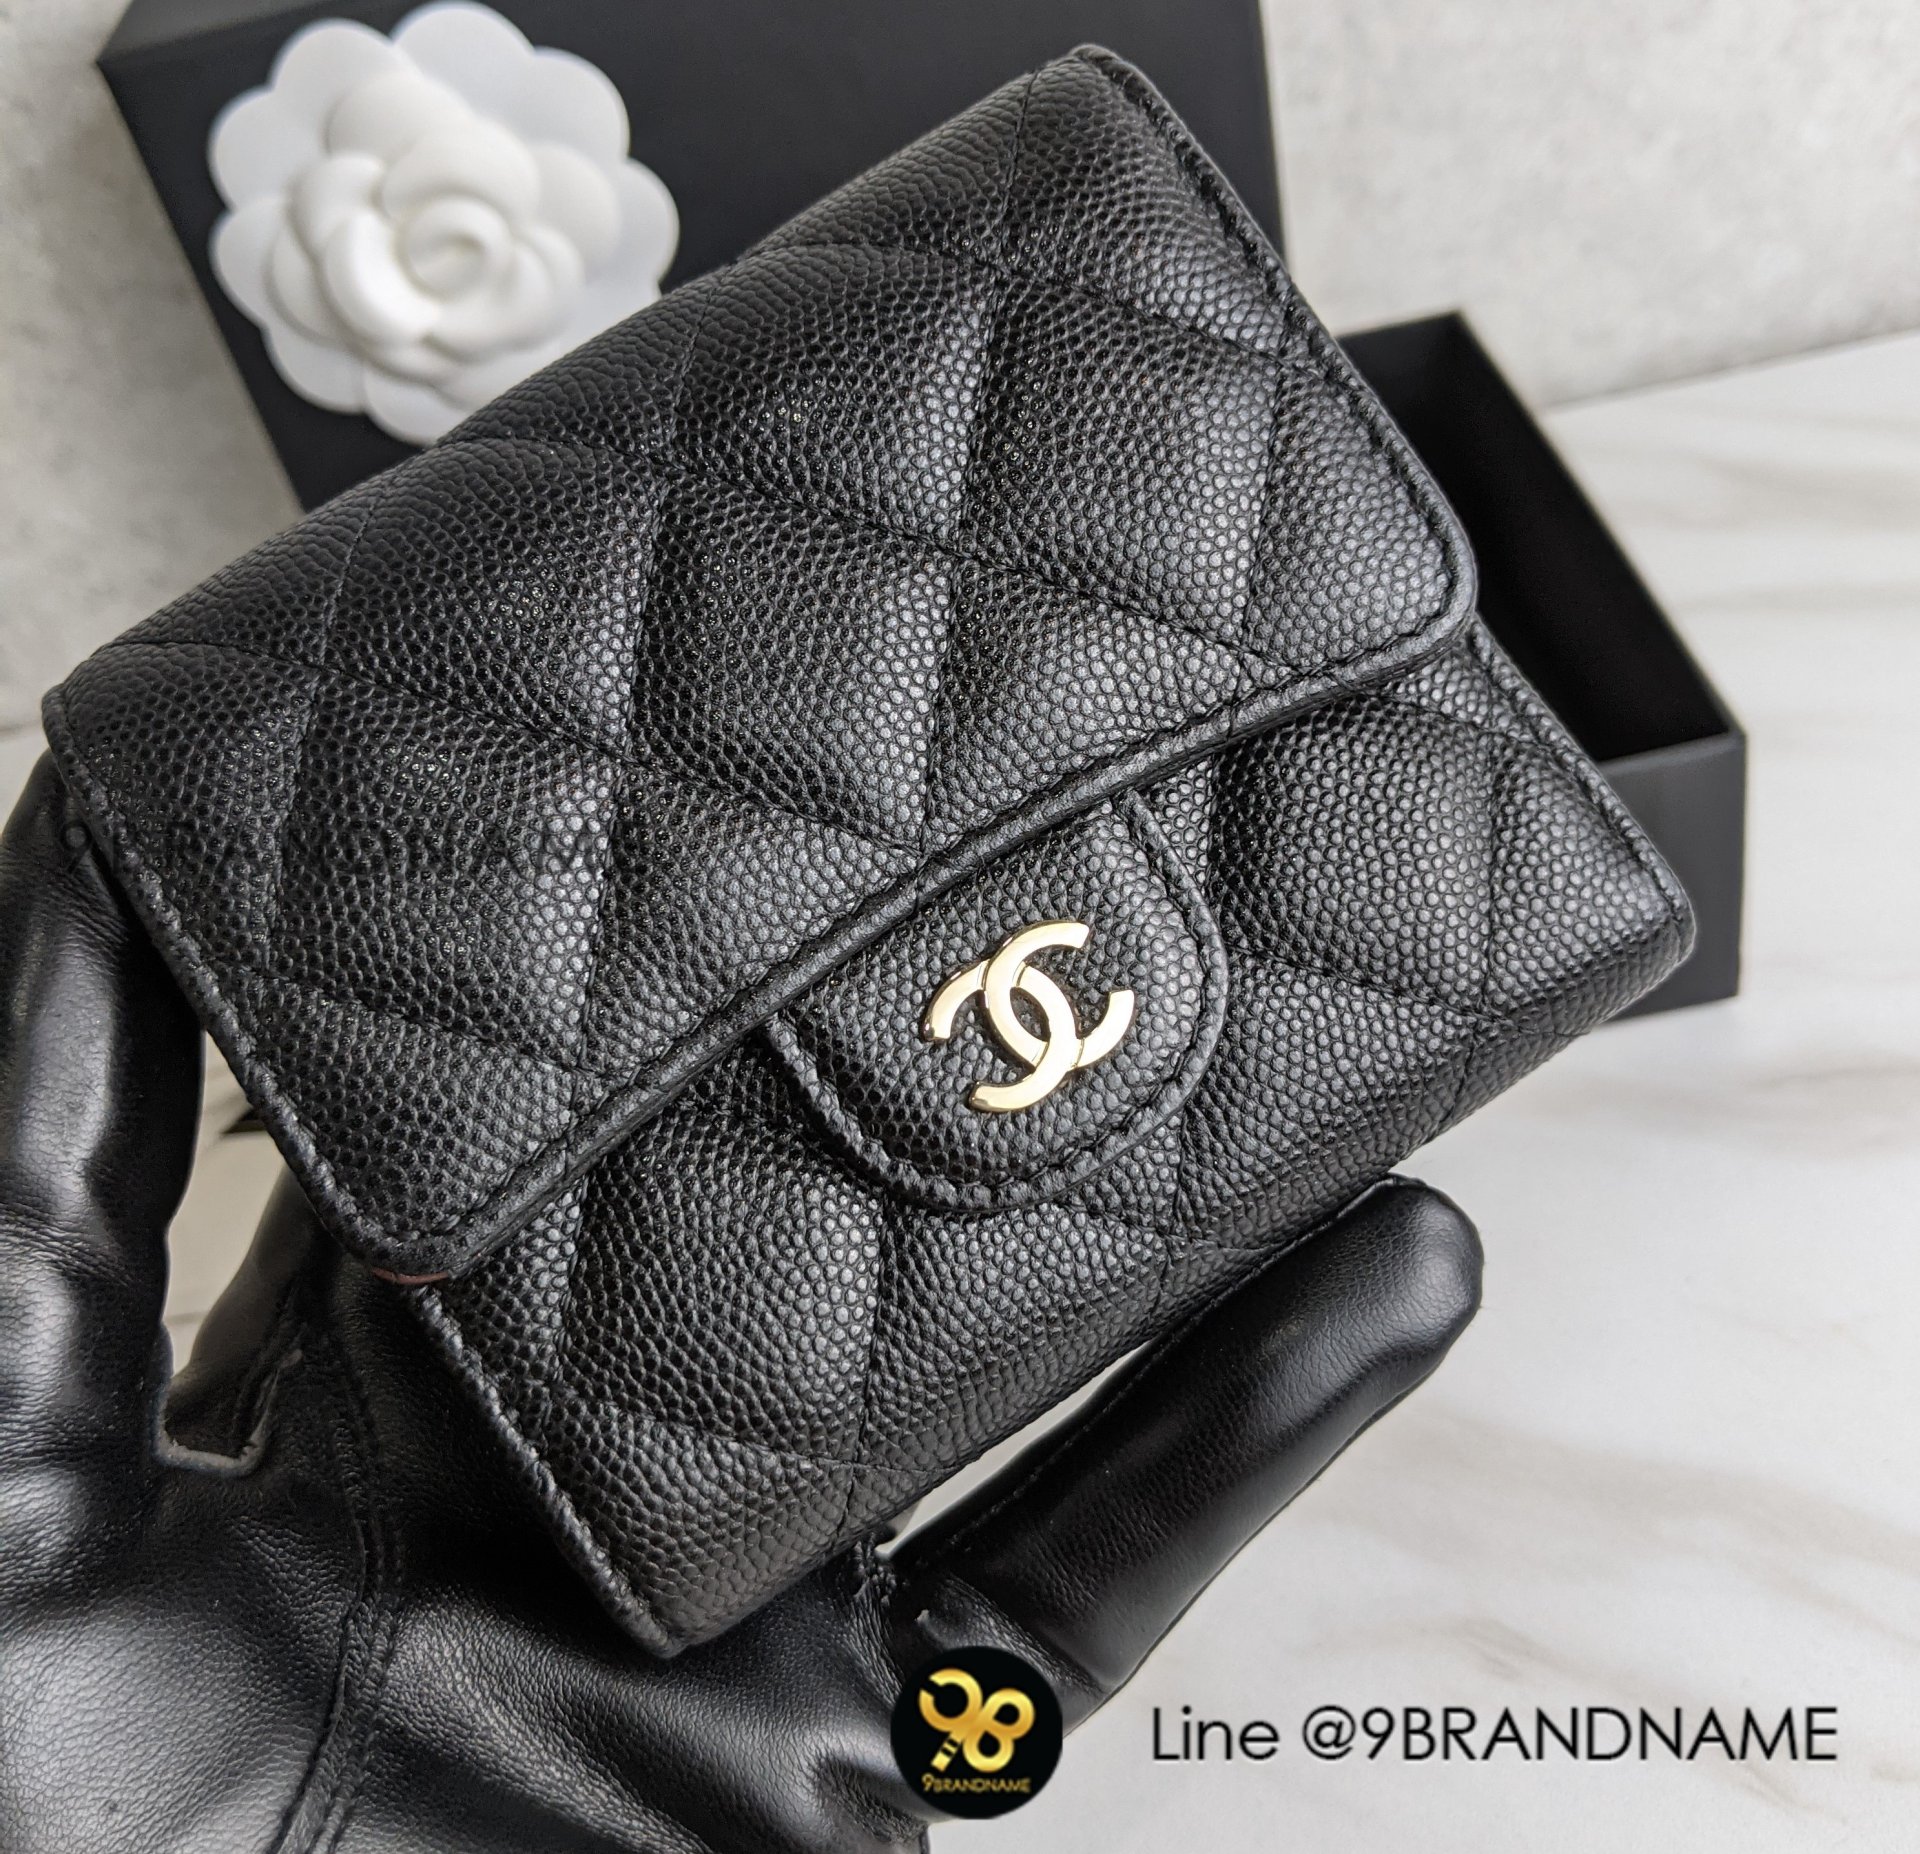 Used​ -​Chanel Classic​ Small​ Flap​ Wallet​ ใบสั้น​ 3พับ - 9brandname